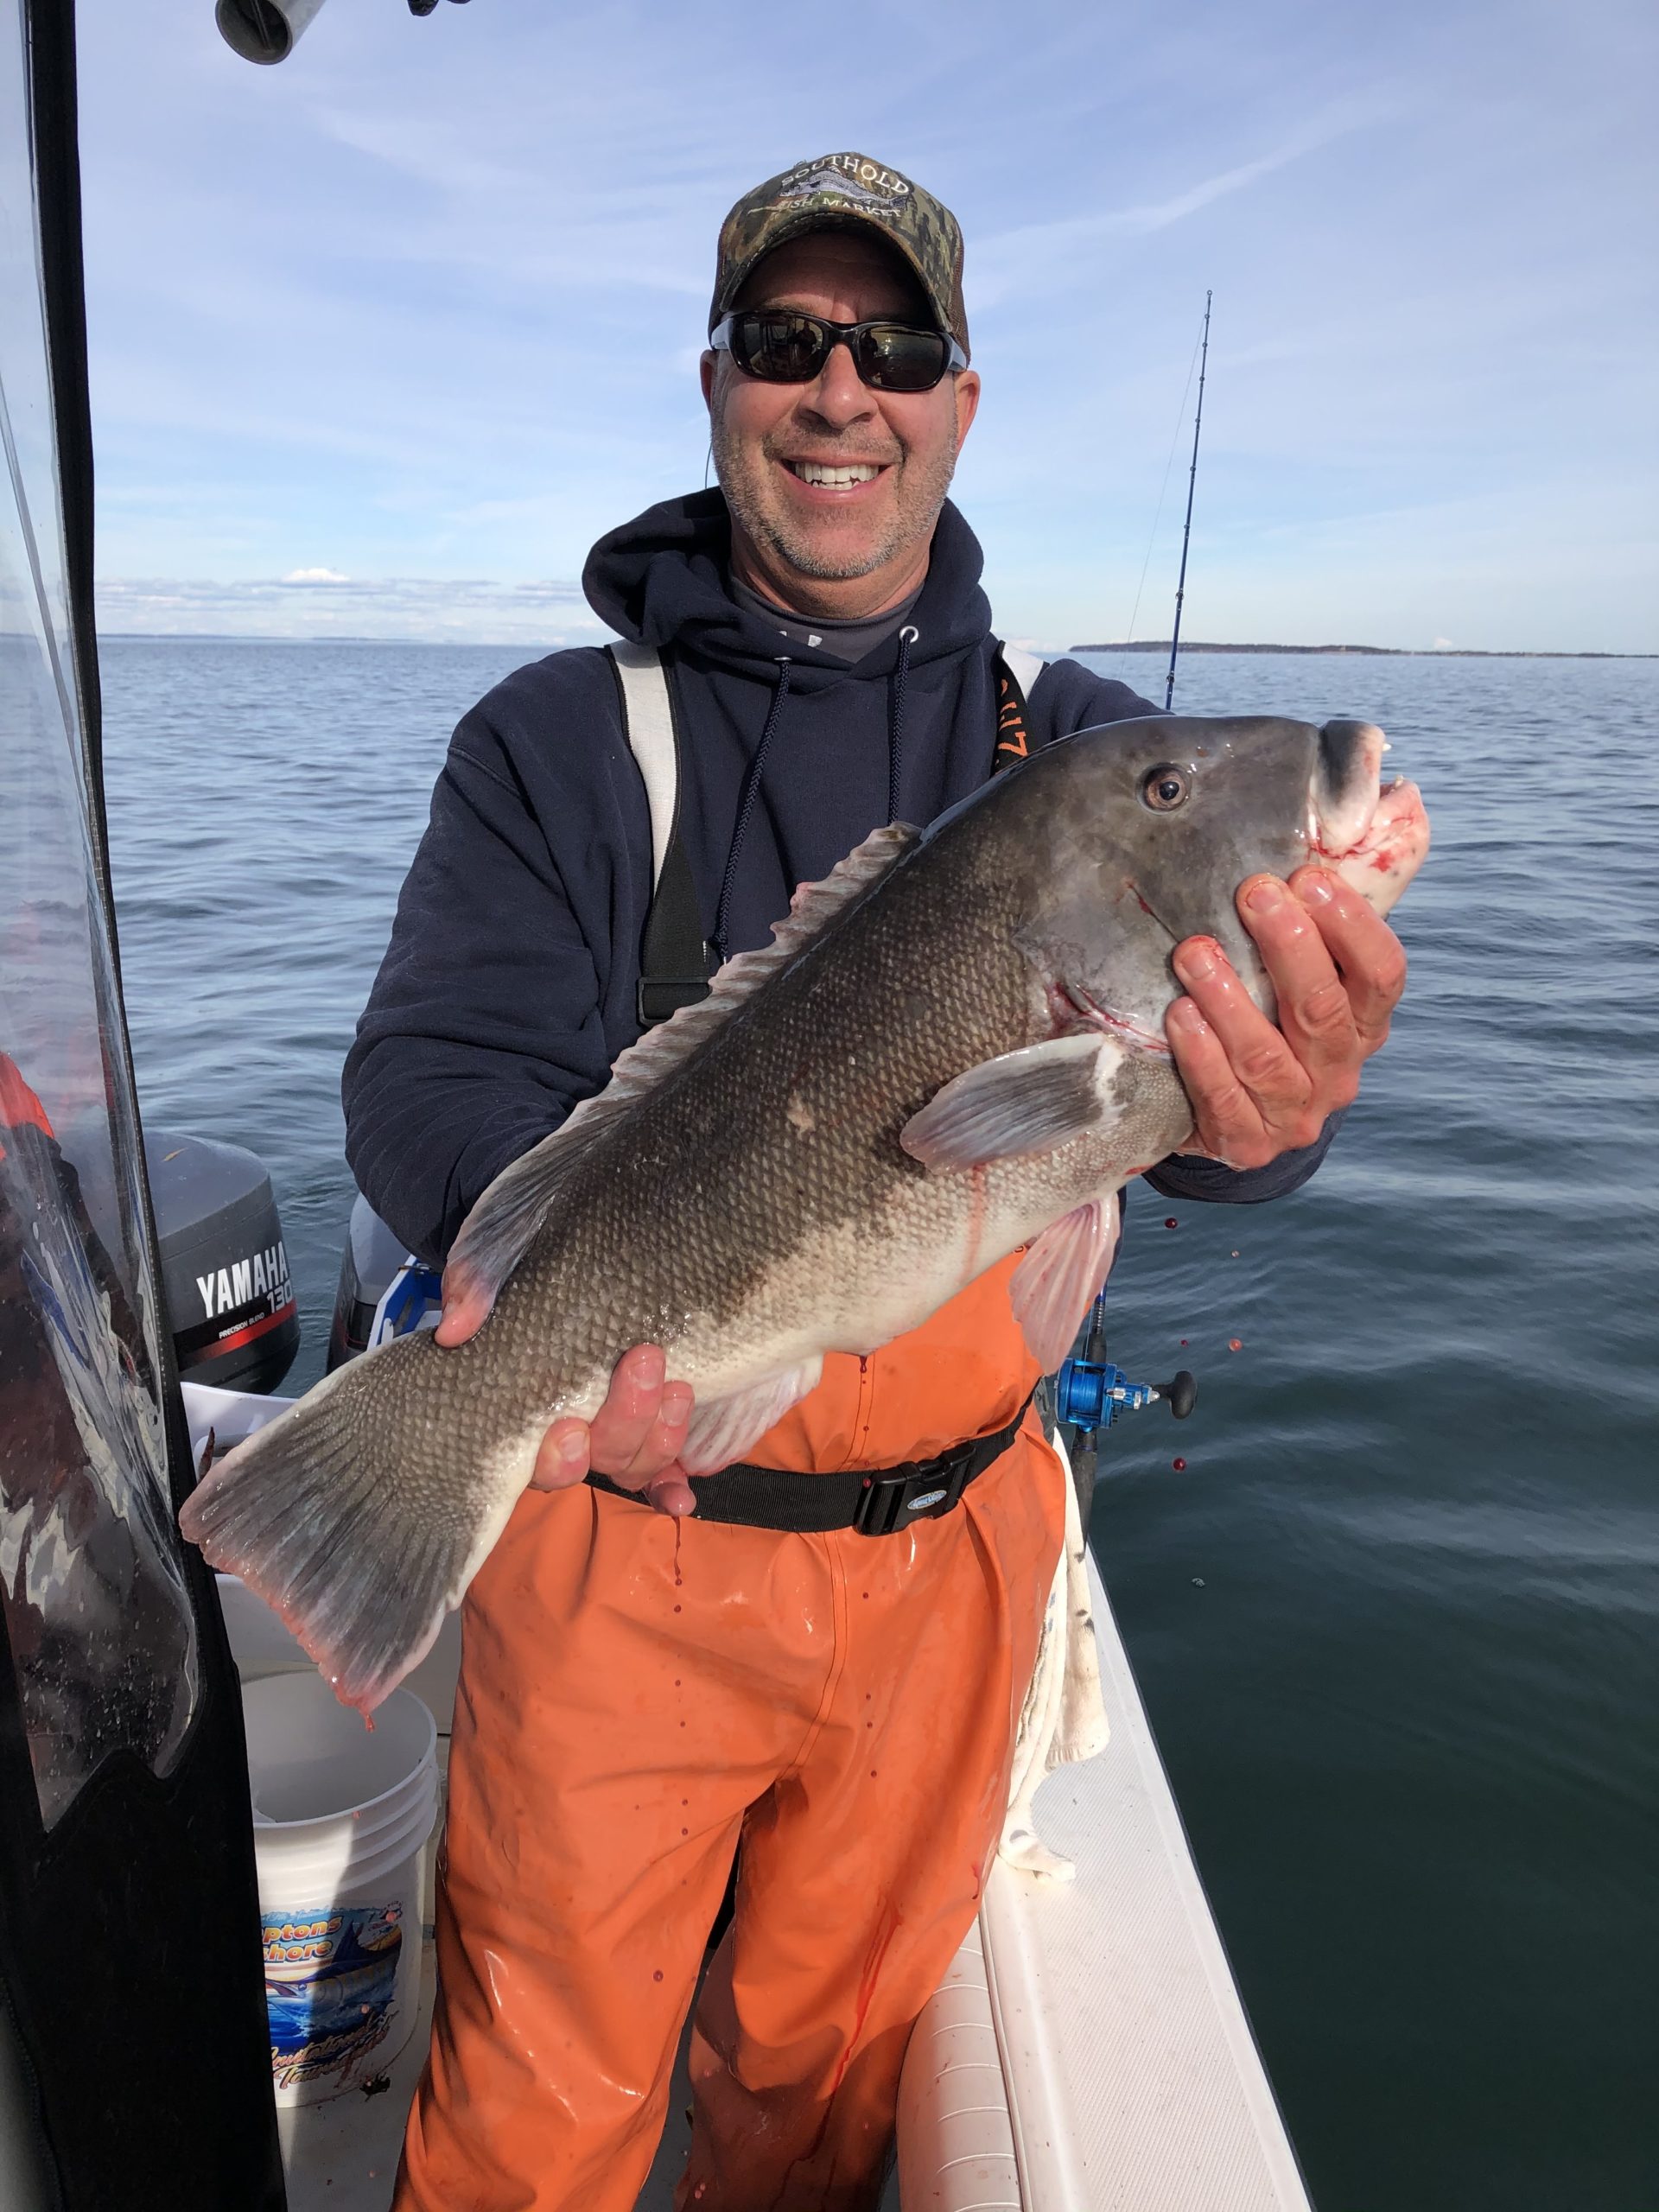 The blackfish bite is in full swing, as this nice 8-pounder decked by Kevin Dehler of Noyac attests.